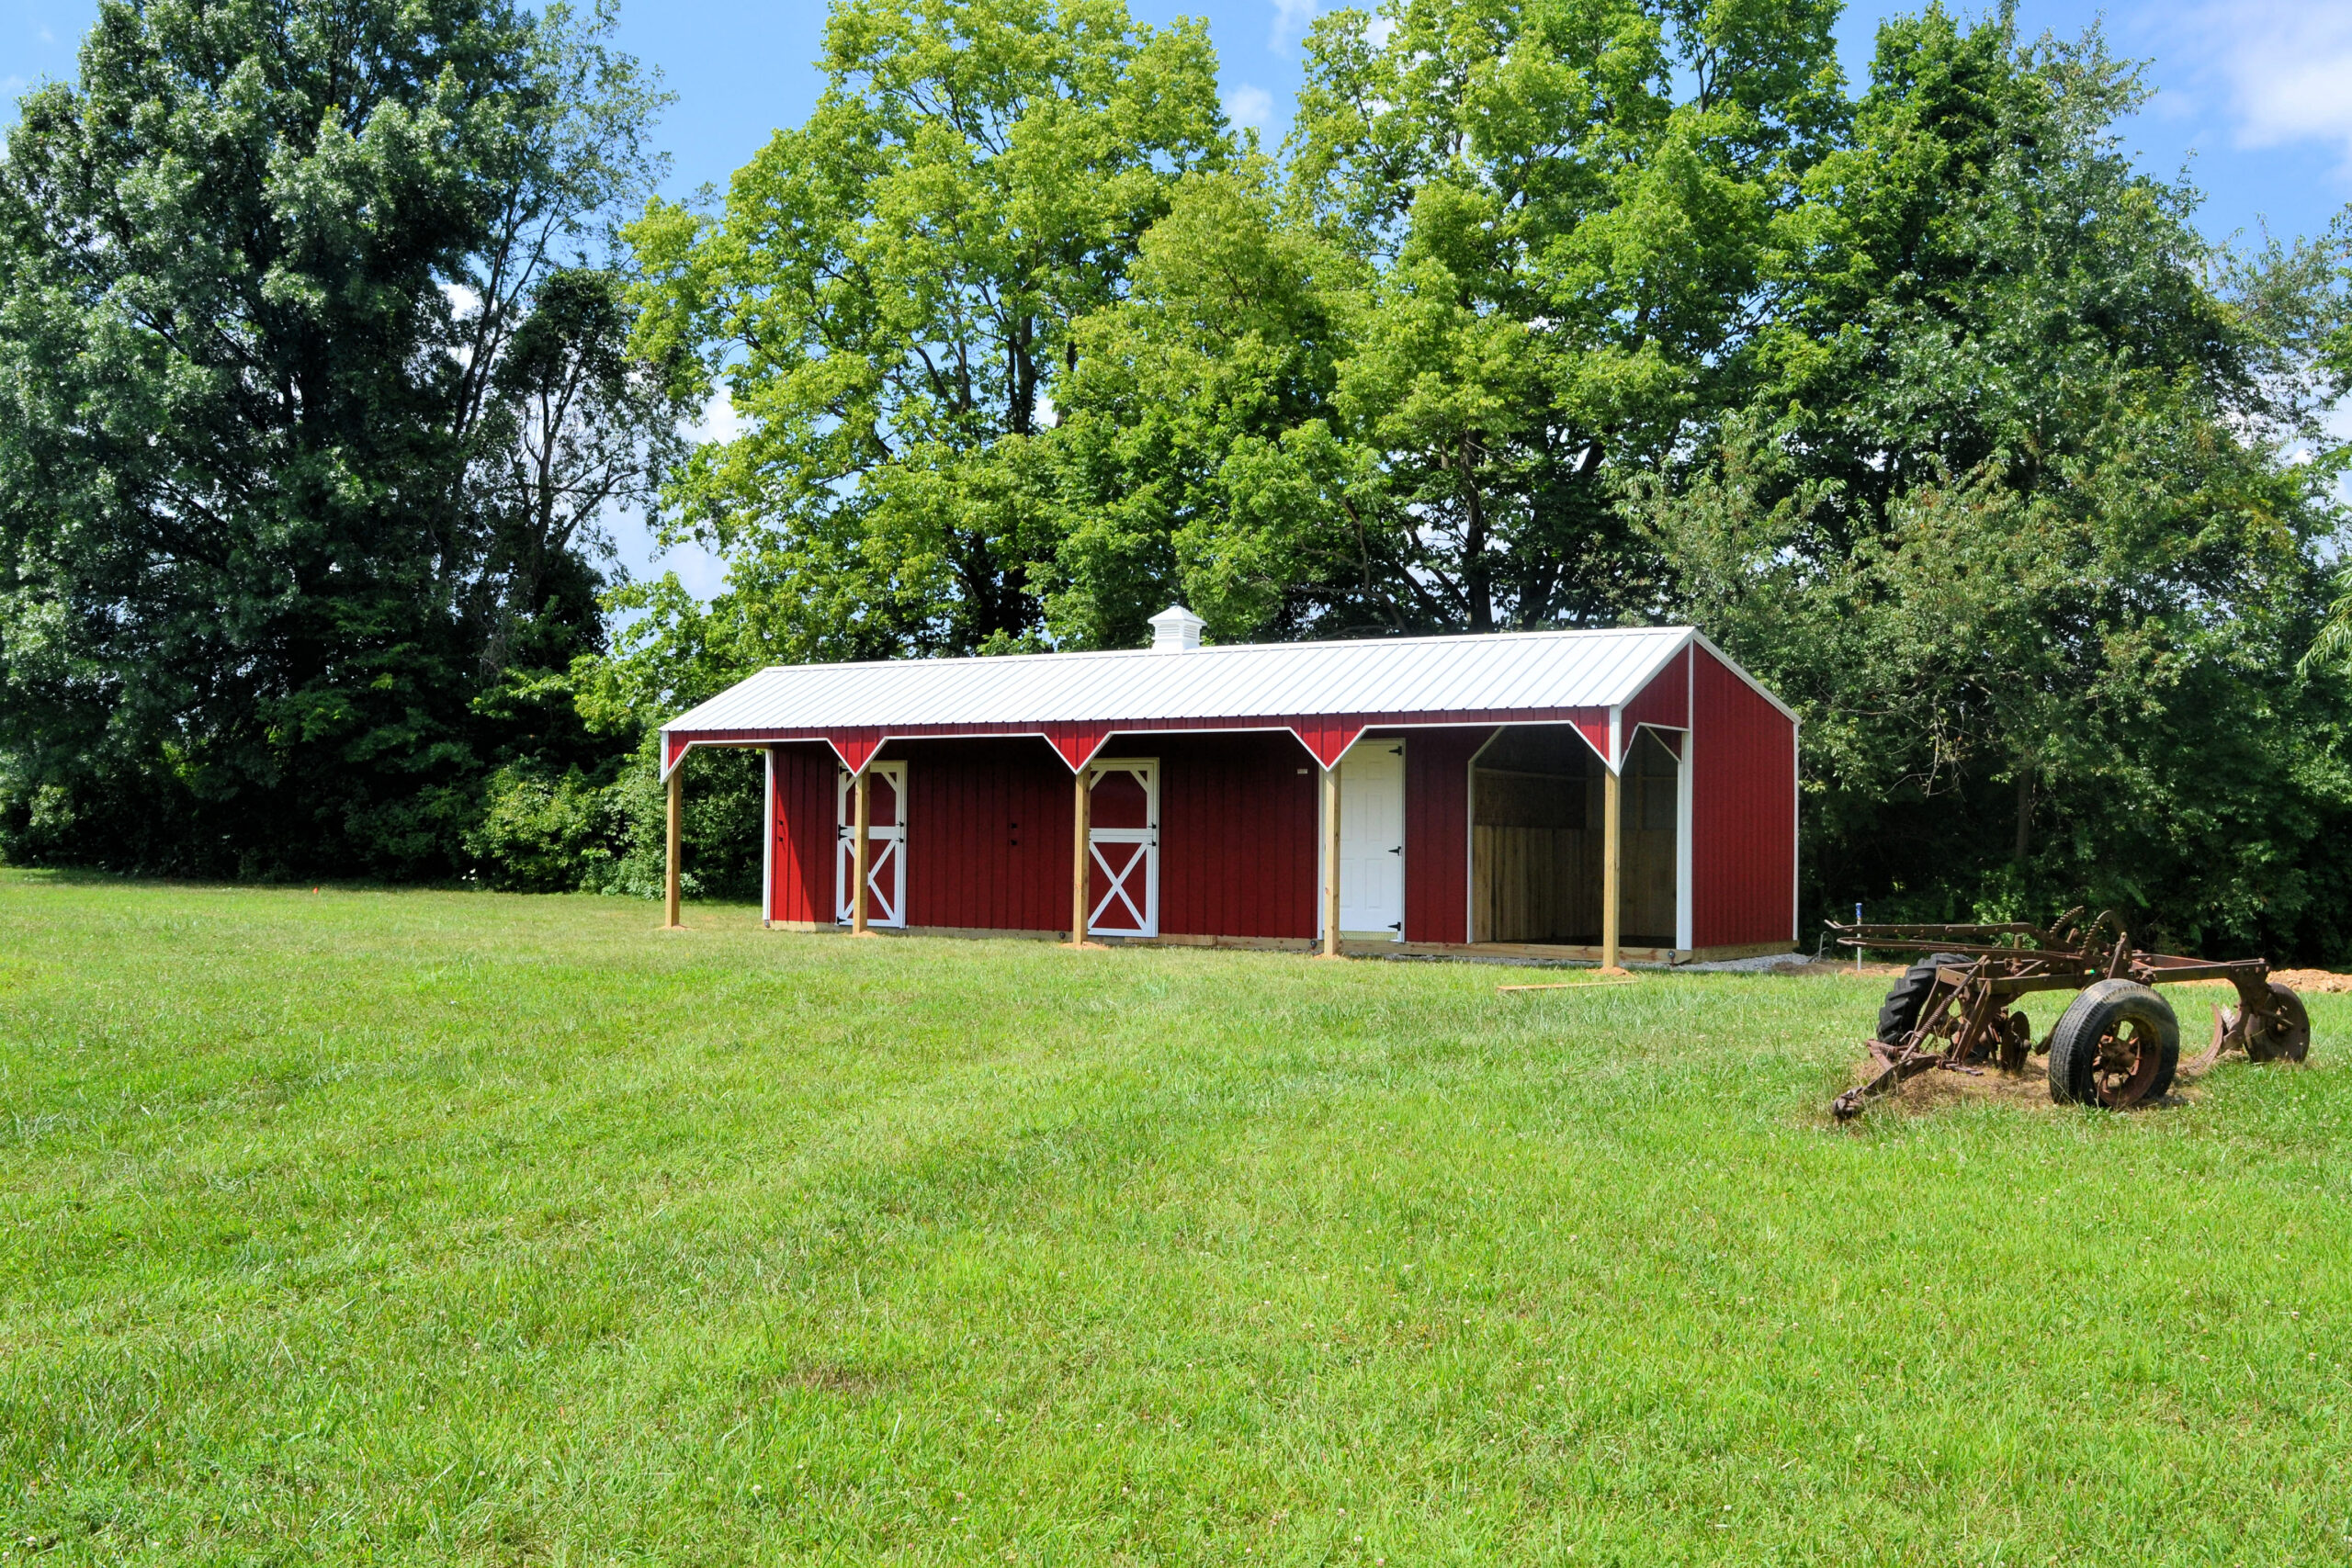 Planning Your First Horse Barn